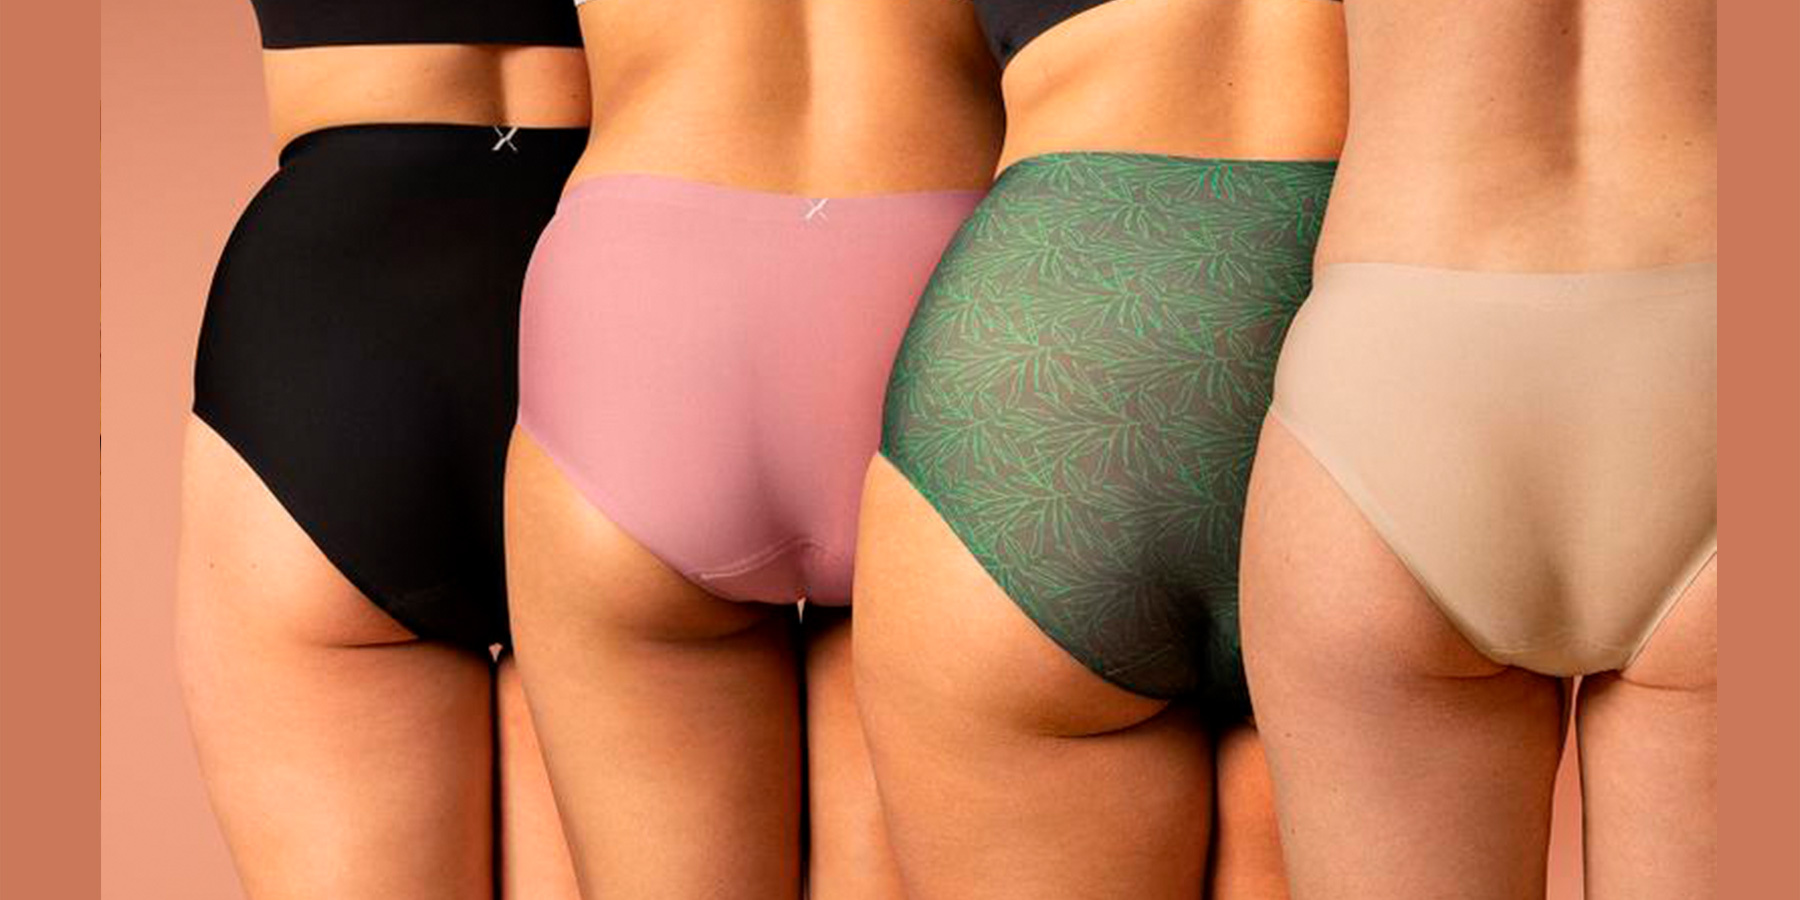 Buy Bambody Period Underwear for Women - Bamboo Absorbent